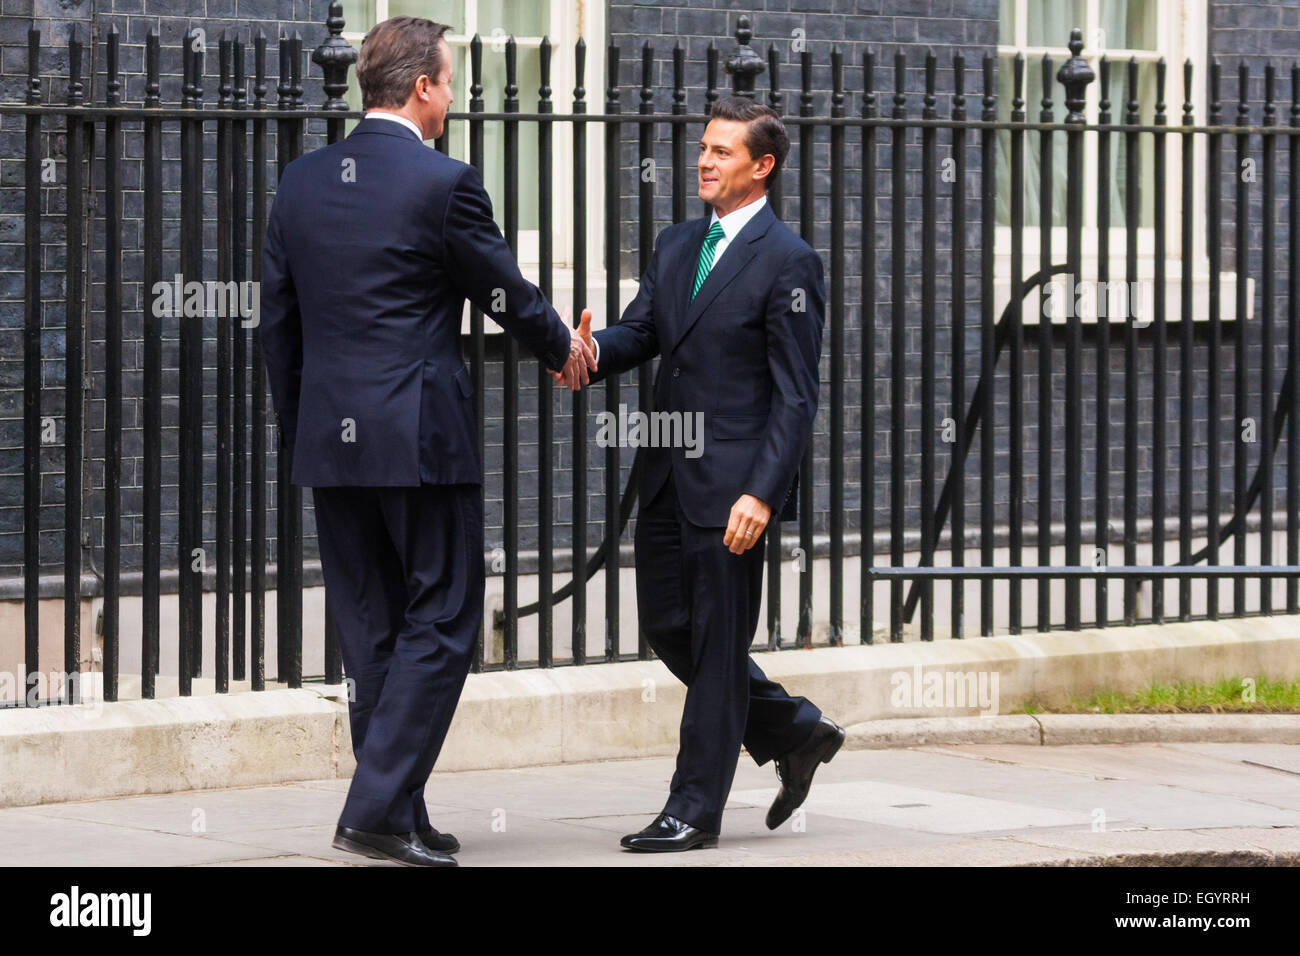 London, UK. 4th March, 2015. President Enrique Pena Nieto arrives at 10 Downing Street for a meeting with Prime Minister David Cameron. Nieto is on a State Visit to the United Kingdom. Credit:  Paul Davey/Alamy Live News Stock Photo